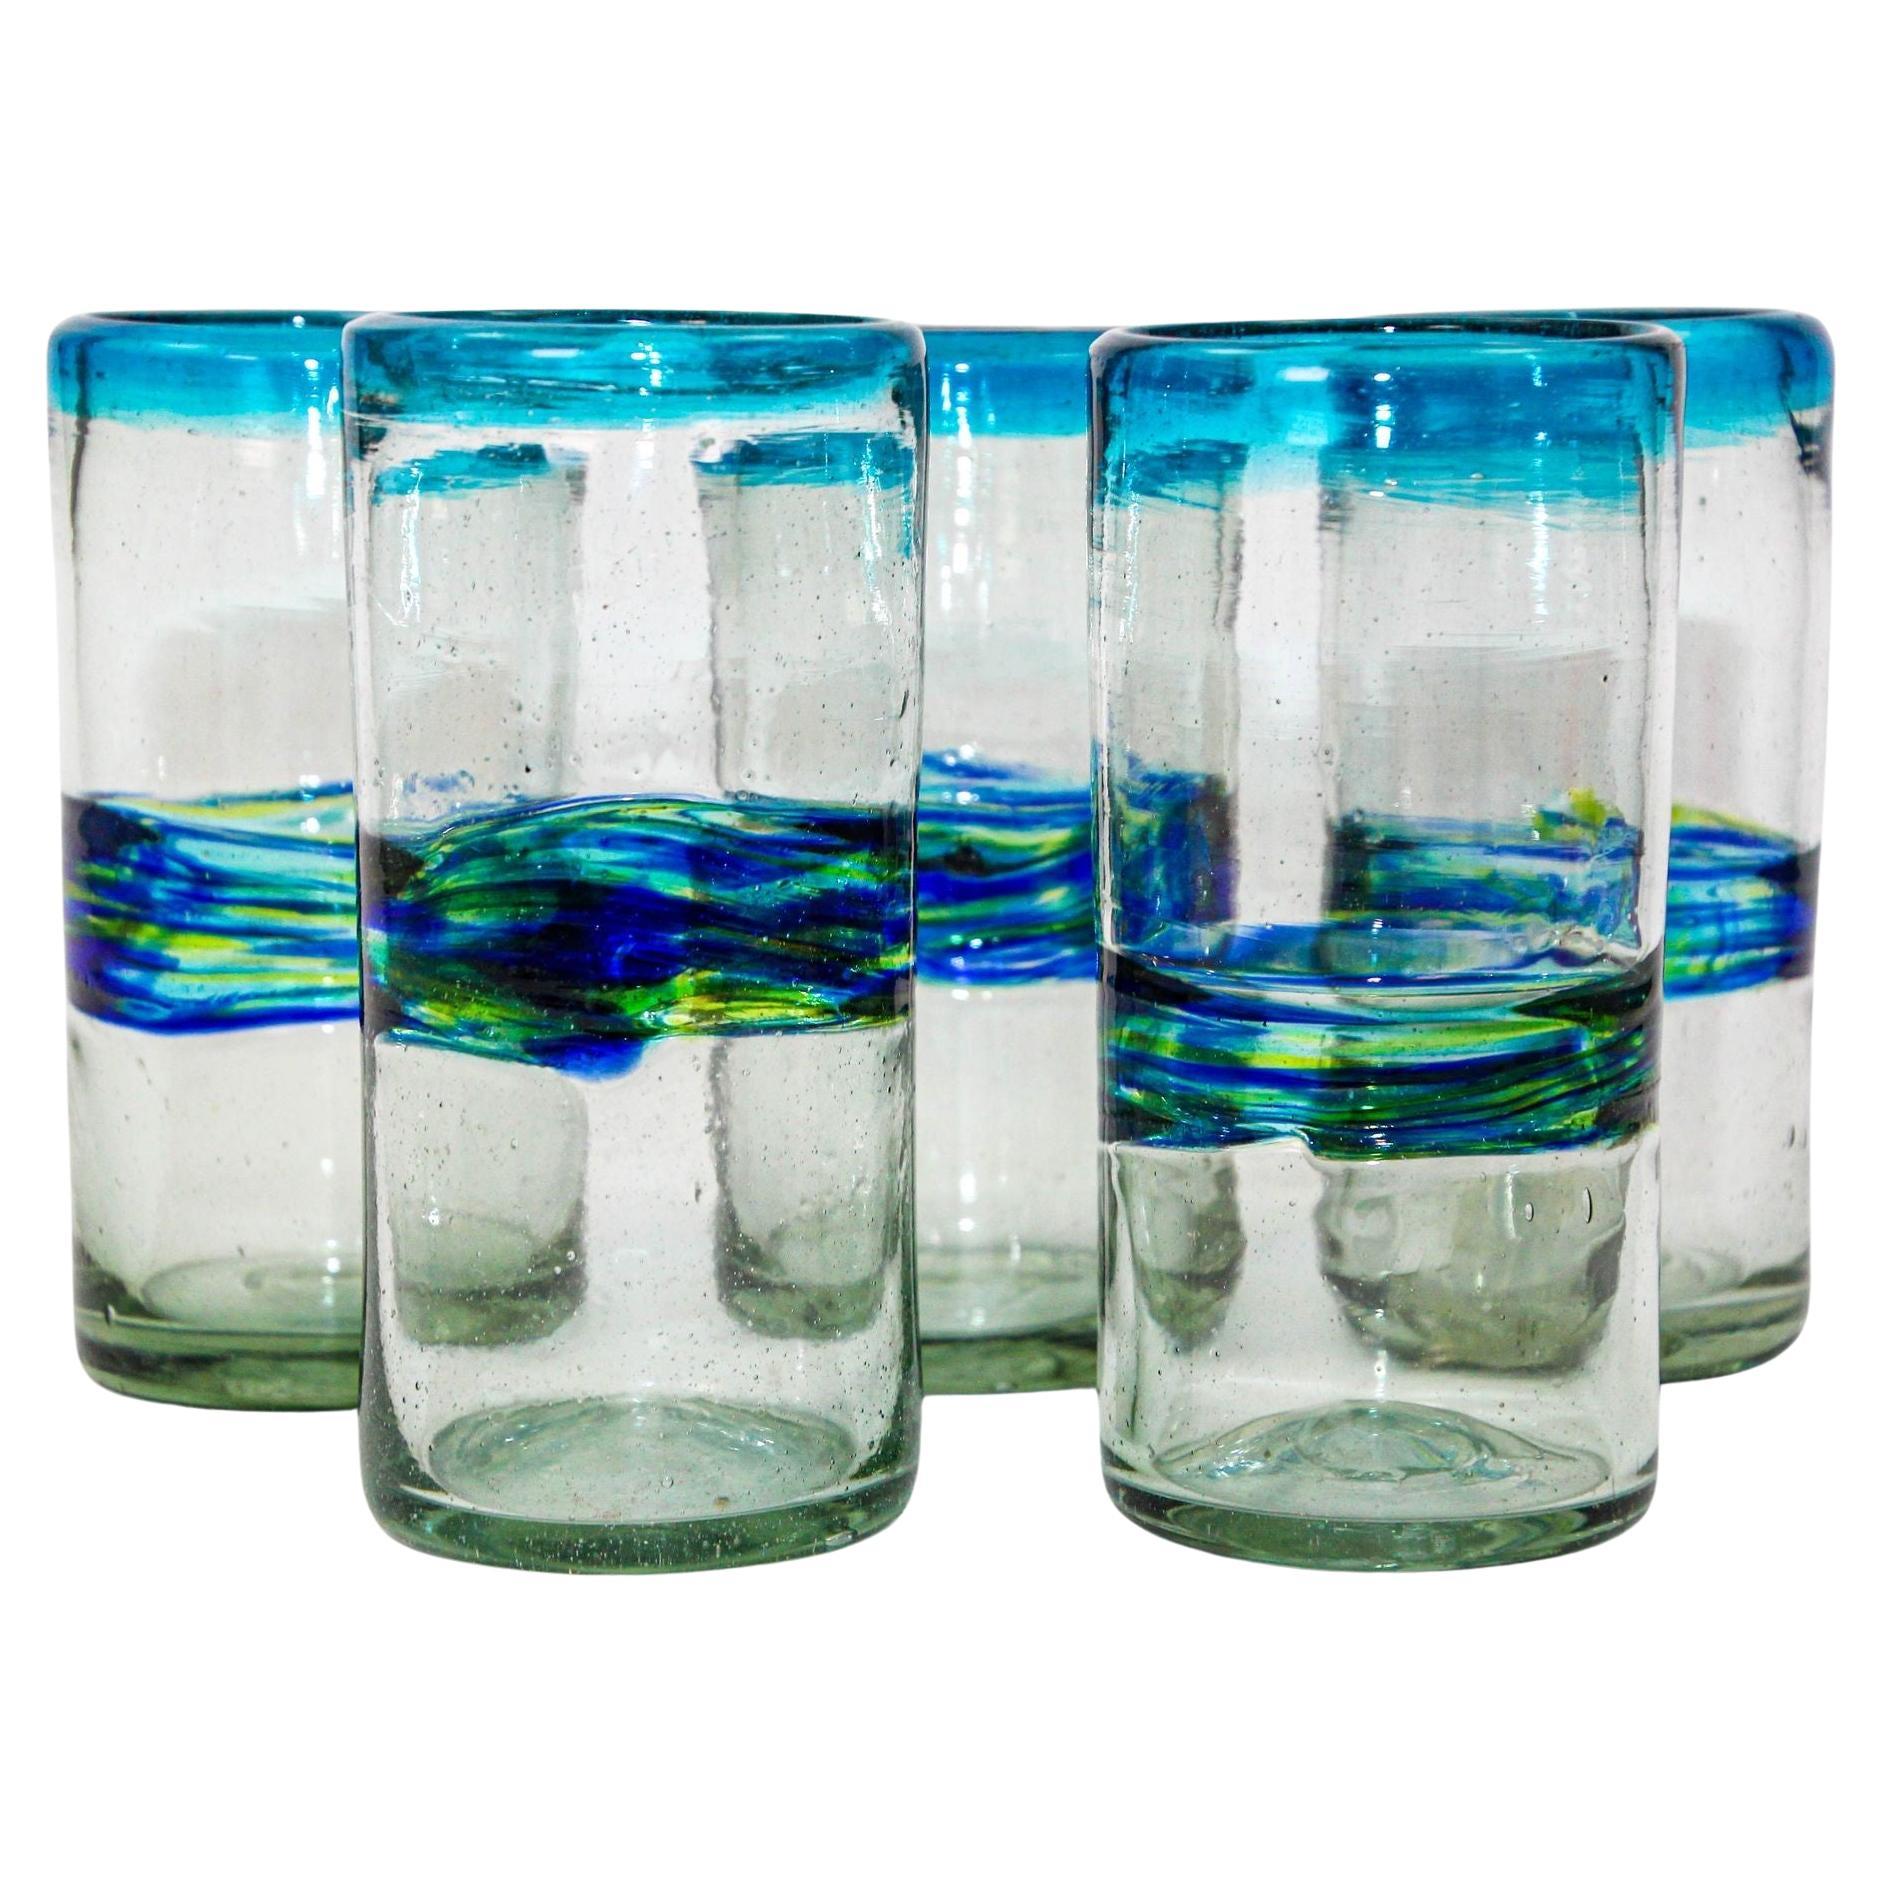 https://a.1stdibscdn.com/vintage-mexican-tumblers-drinking-glasses-with-a-swirl-band-set-of-5-barware-for-sale/f_9068/f_376893721703280437966/f_37689372_1703280438714_bg_processed.jpg